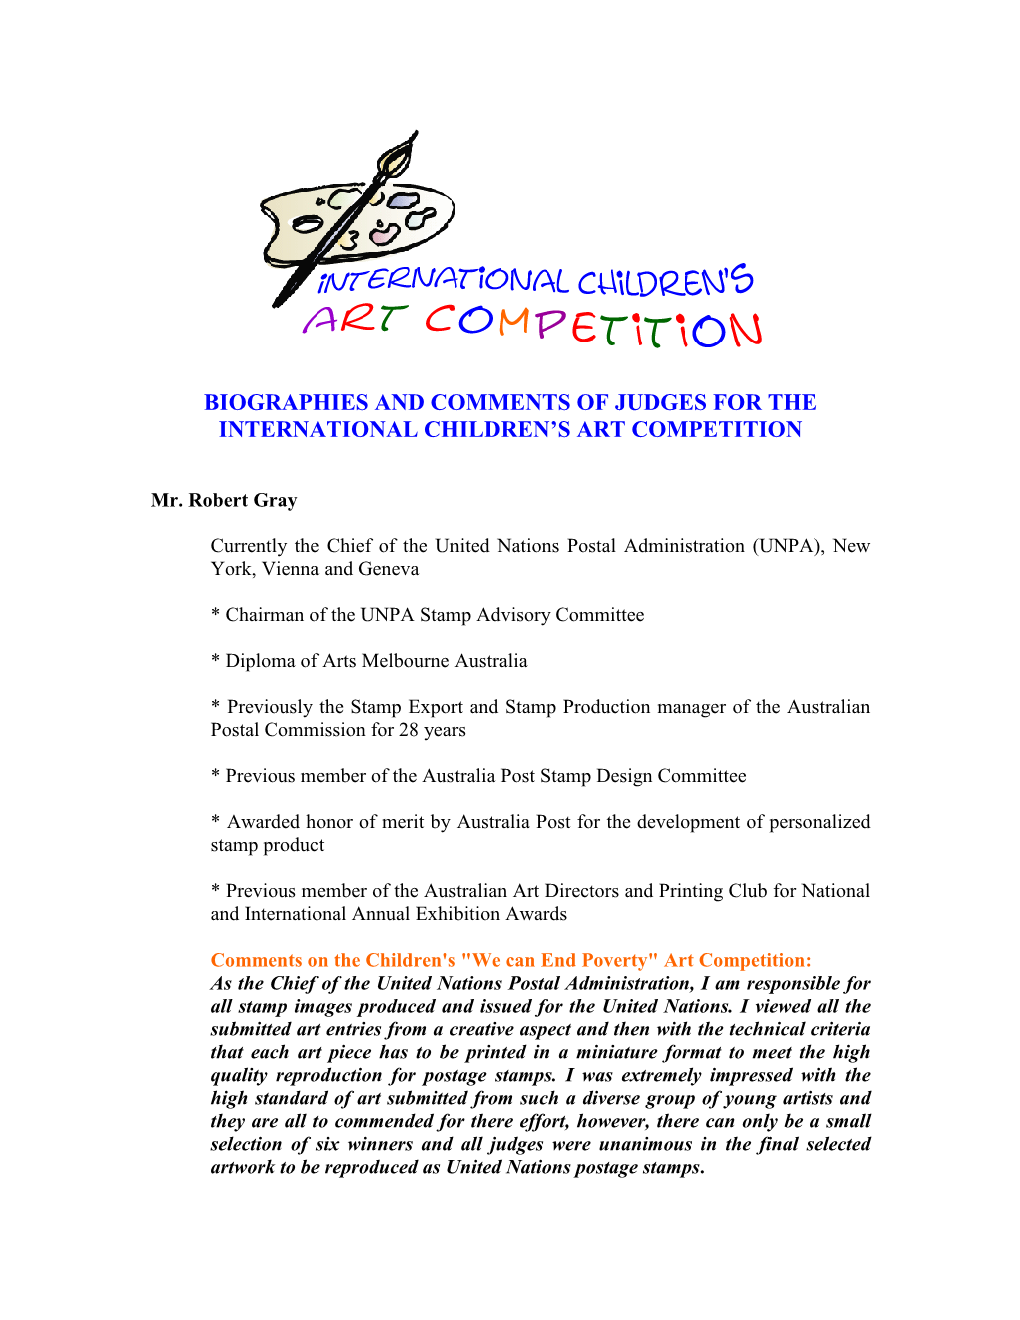 Biographies and Comments of Judges for the International Children's Art Competition